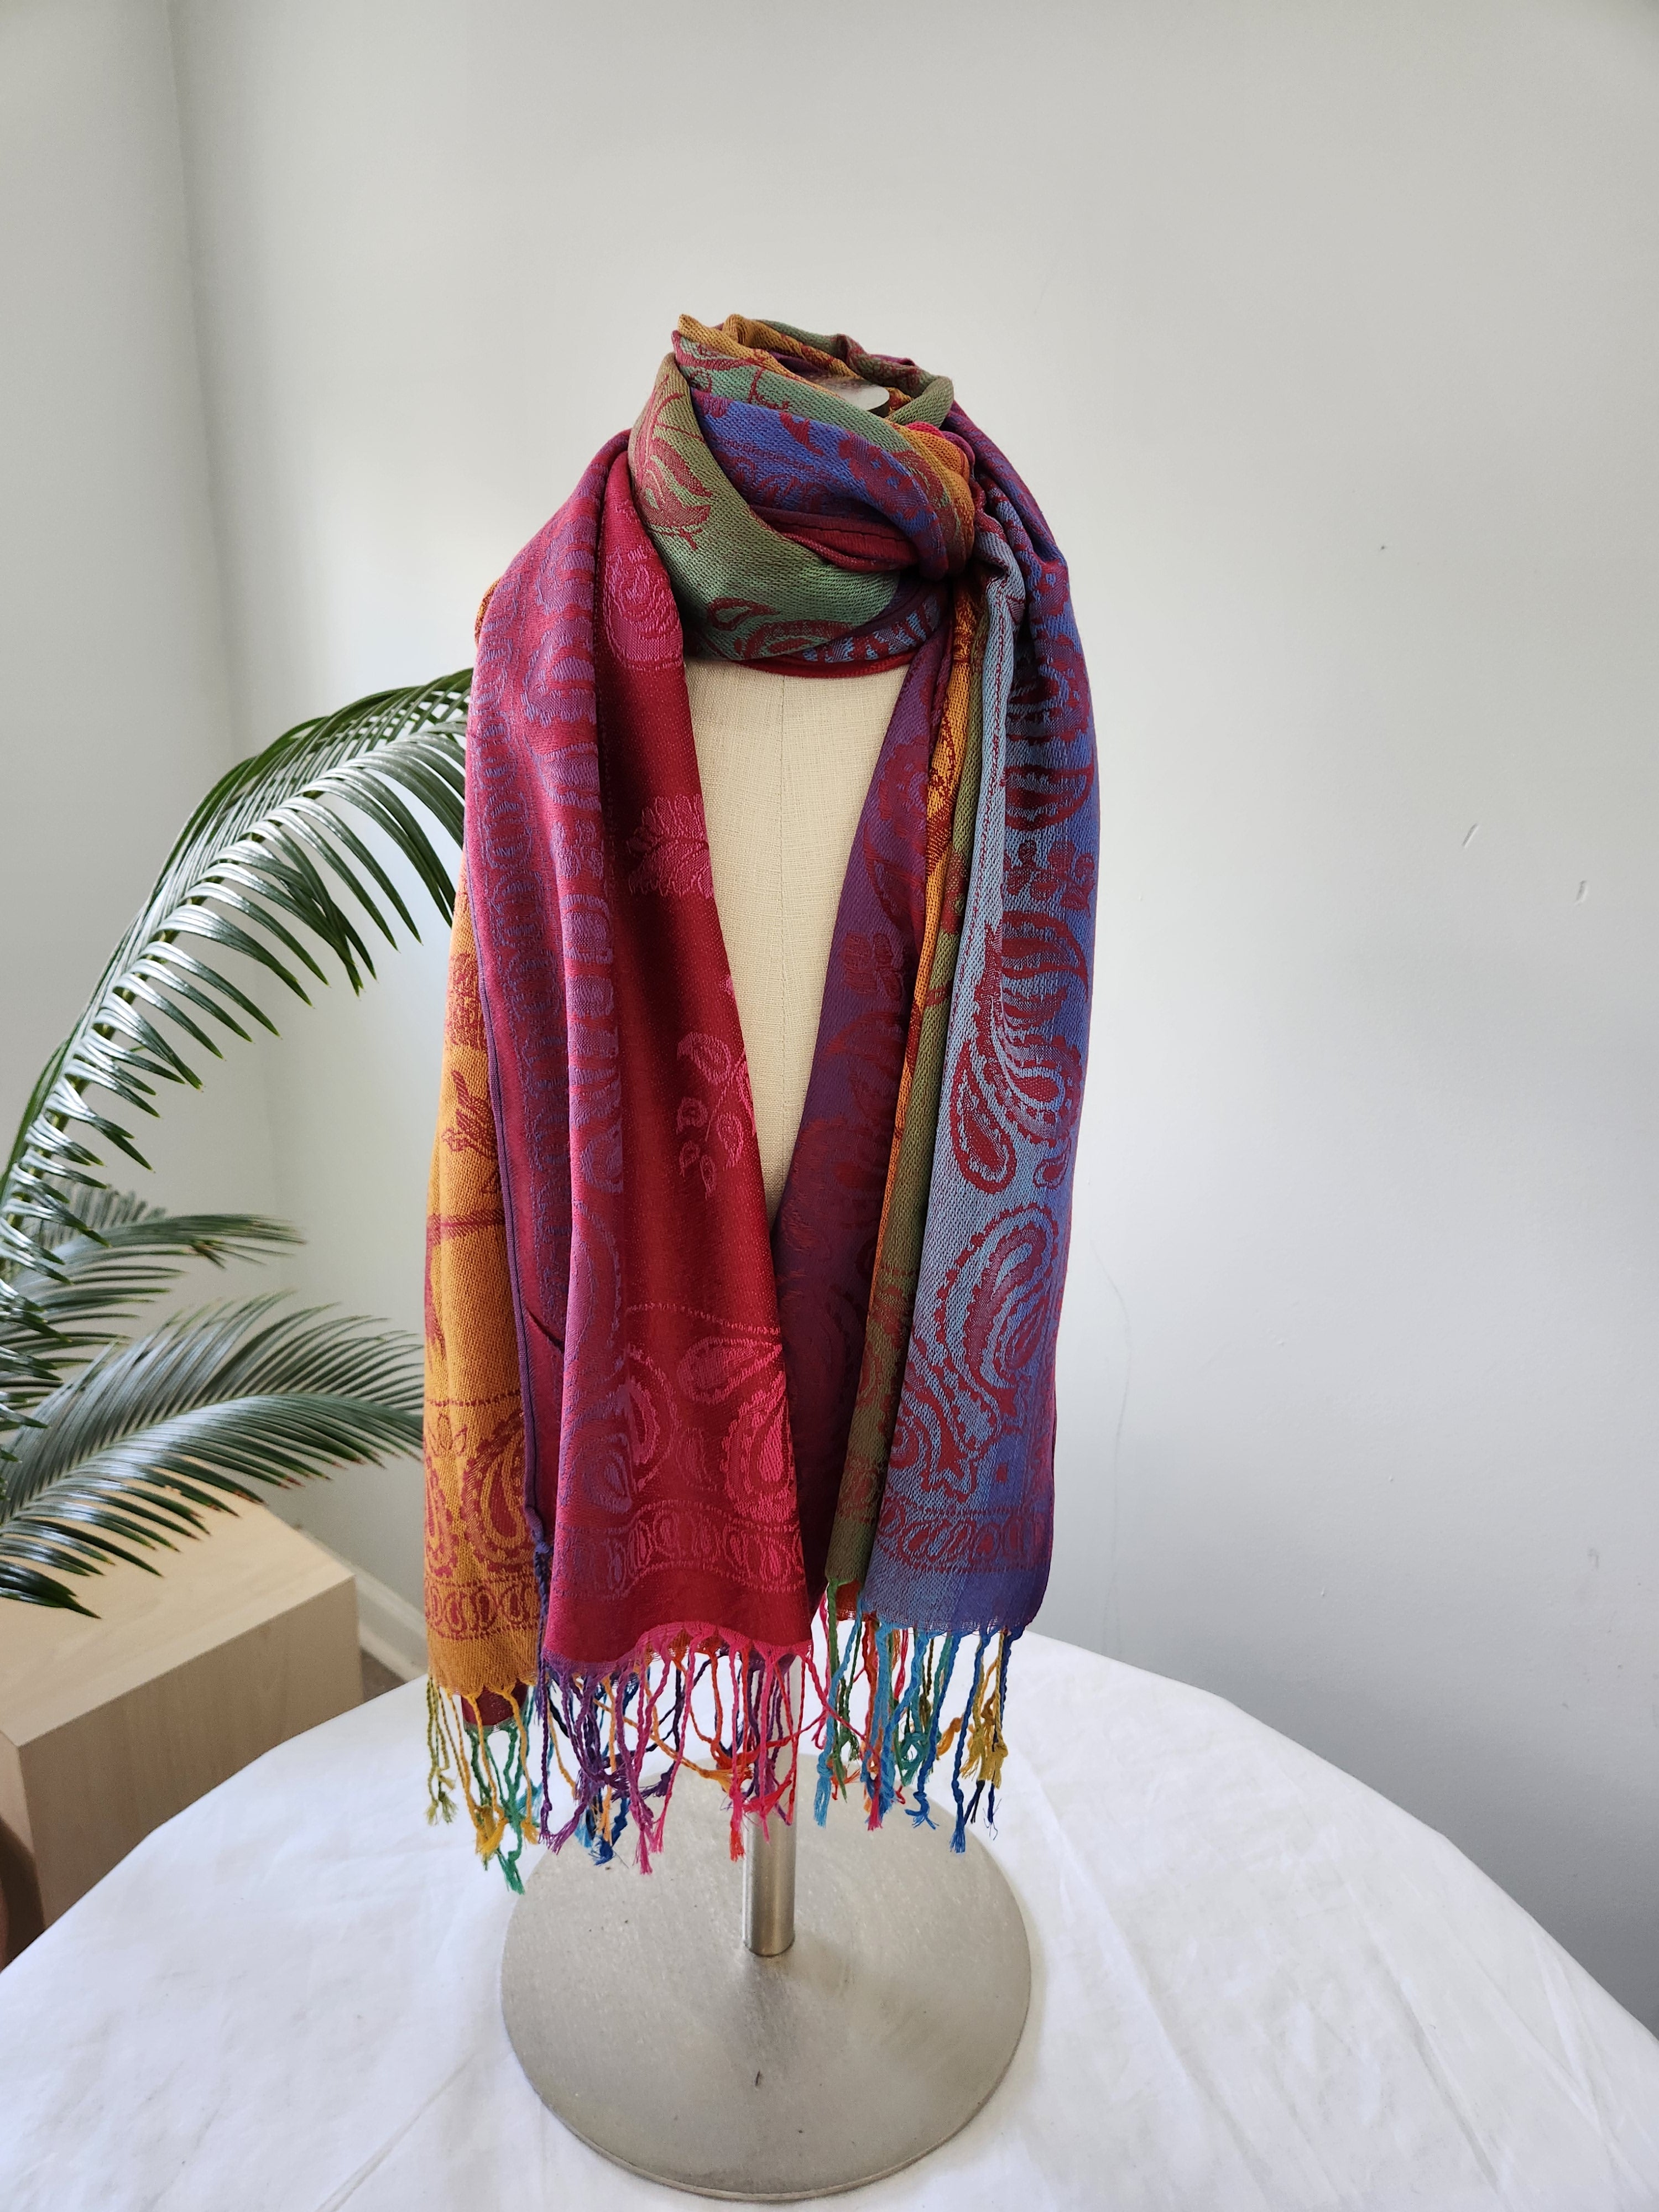 Buy scarlet-red Women&#39;s Elegant Scarf or Wrap, Colorful Jewel-Tones, Great Gift for Holidays